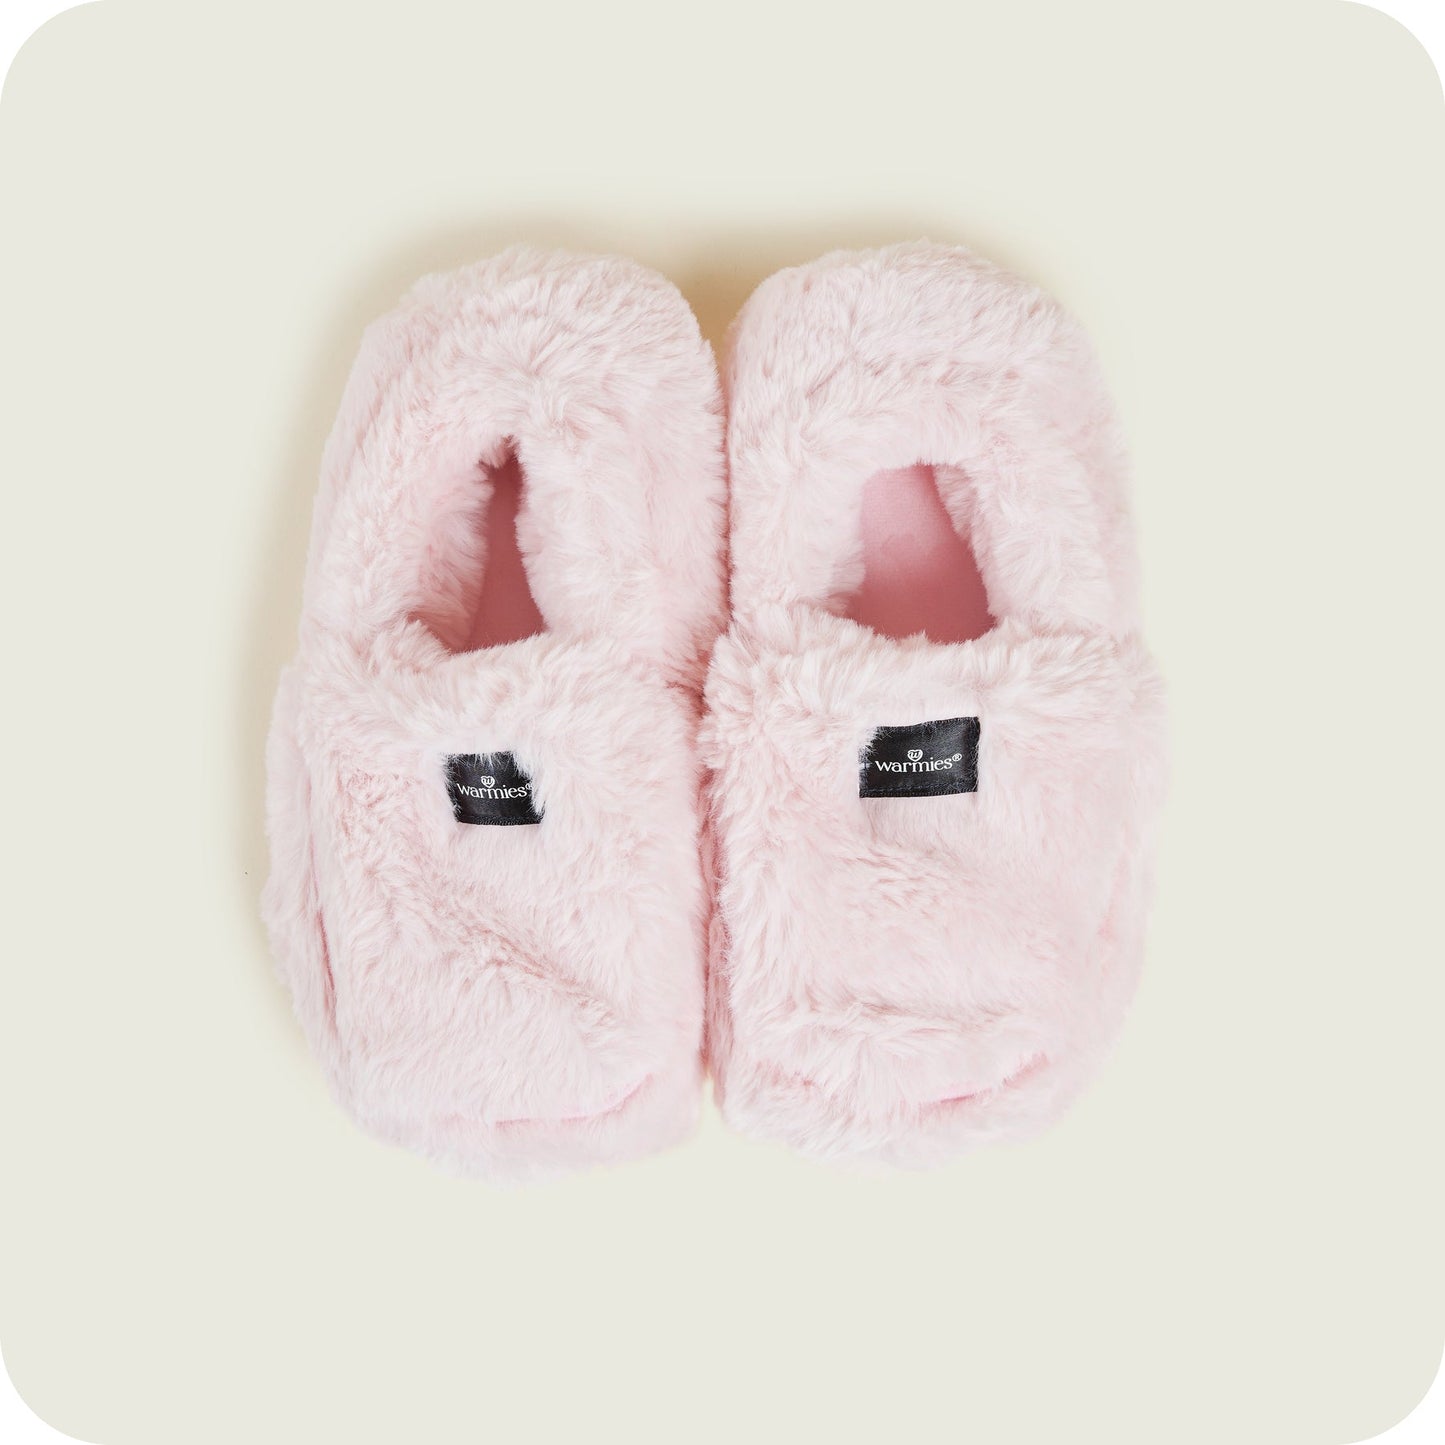 Warmies Luxury Slippers in Box - Pink